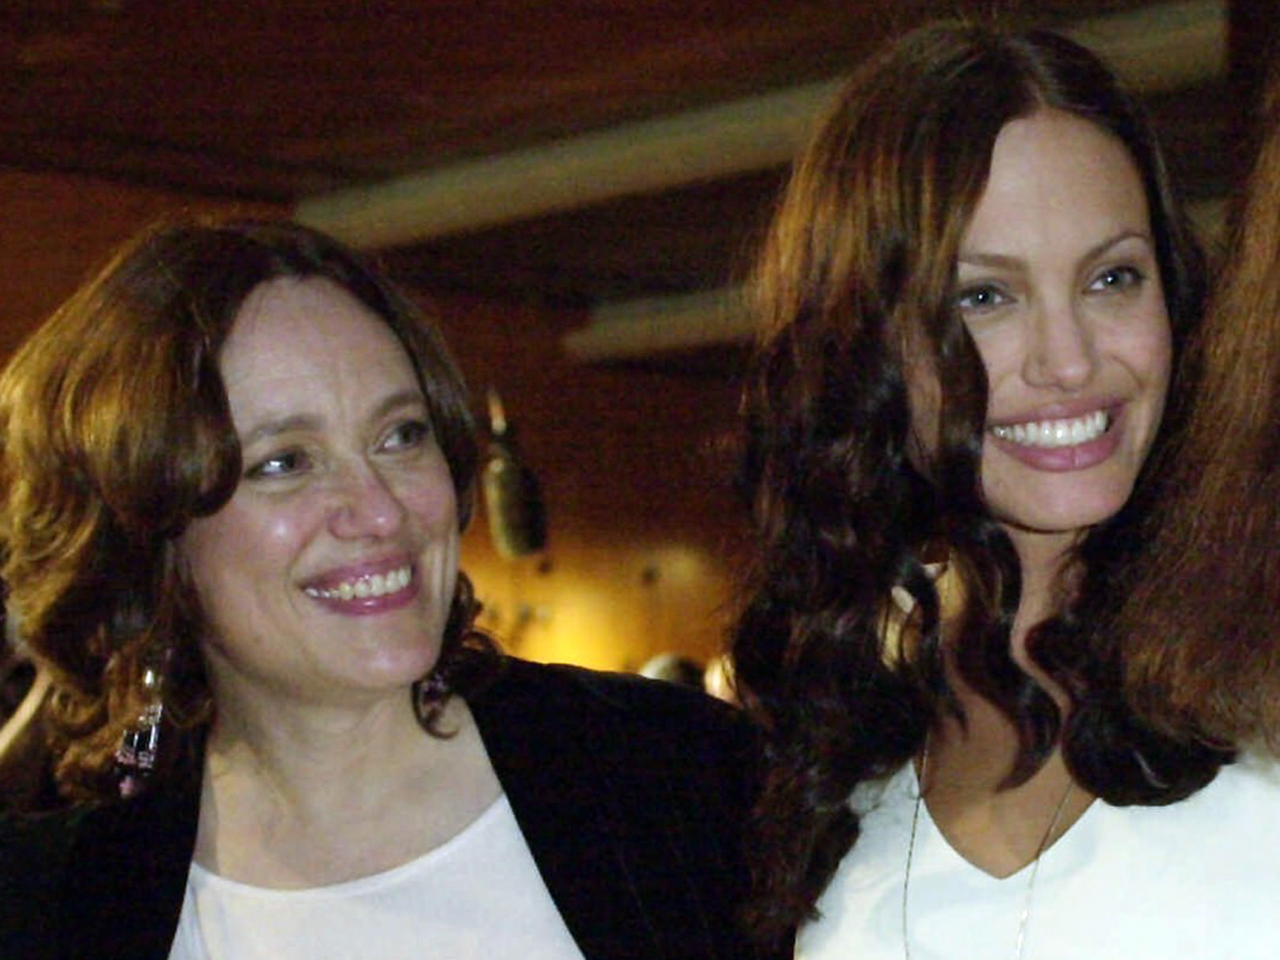 The Angelina effect: Jolie's surgery sparks surge in cancer tests